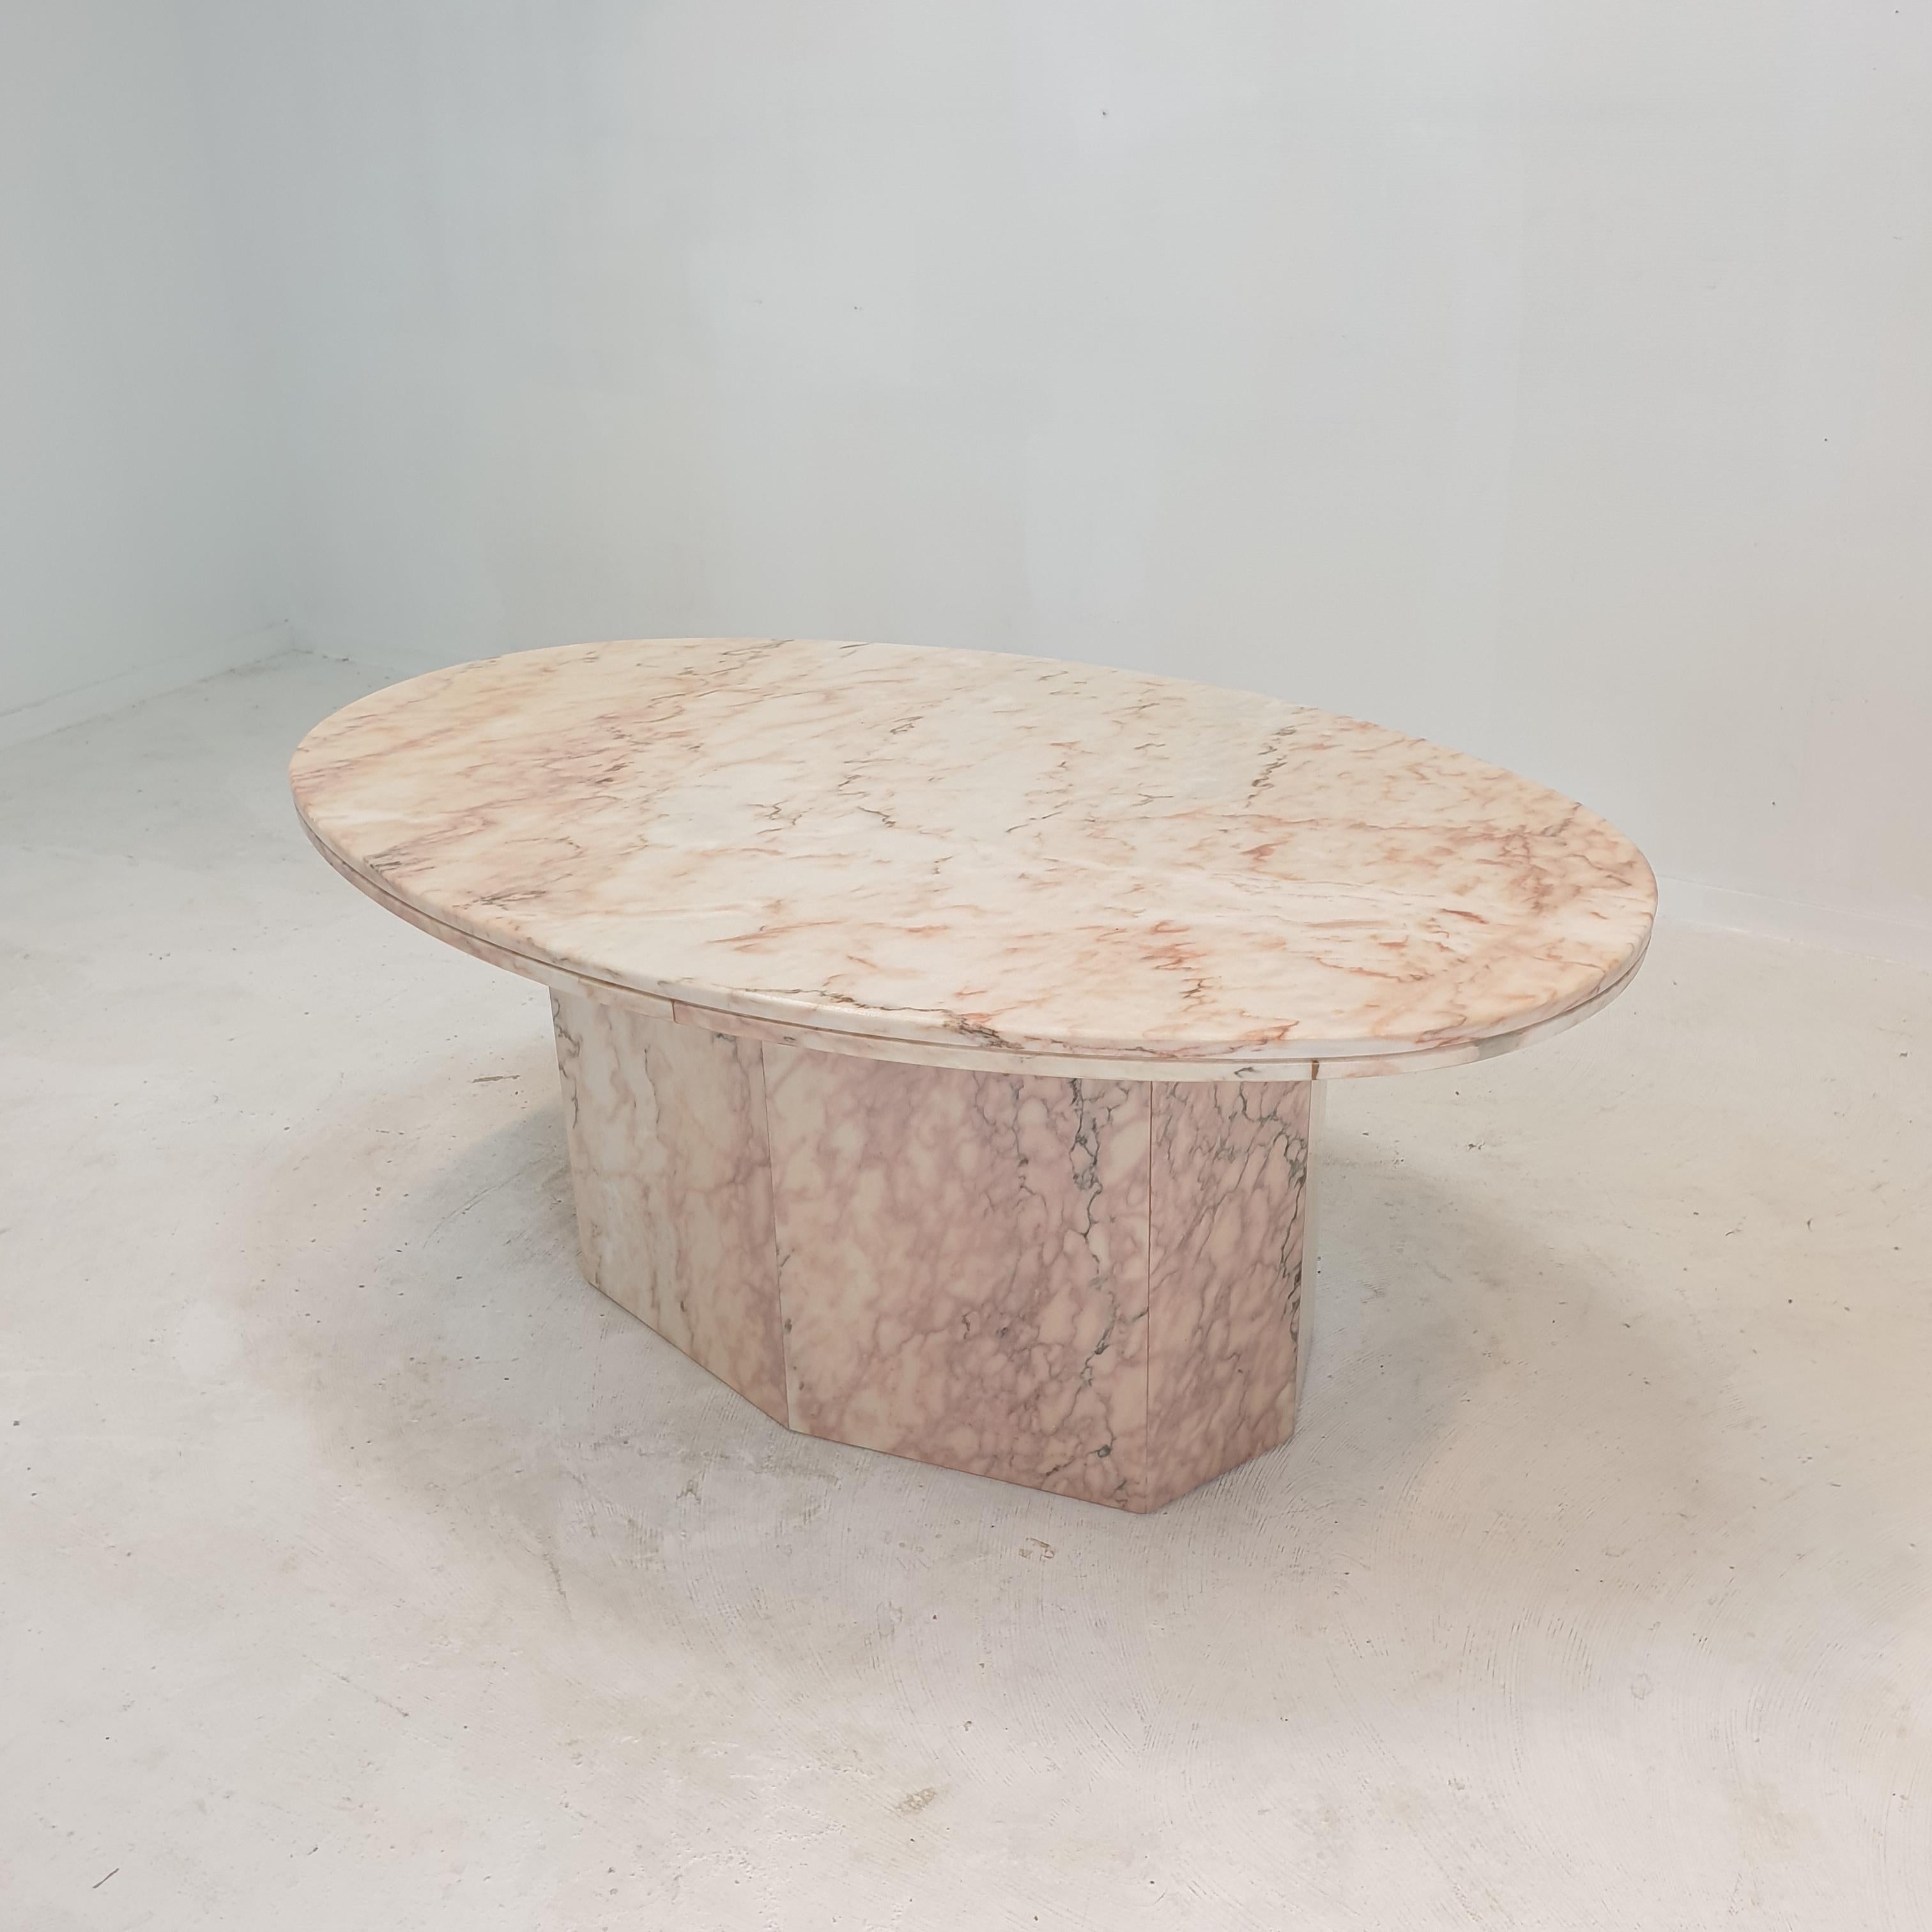 Hand-Crafted Italian Marble Oval Coffee Table, 1970's For Sale